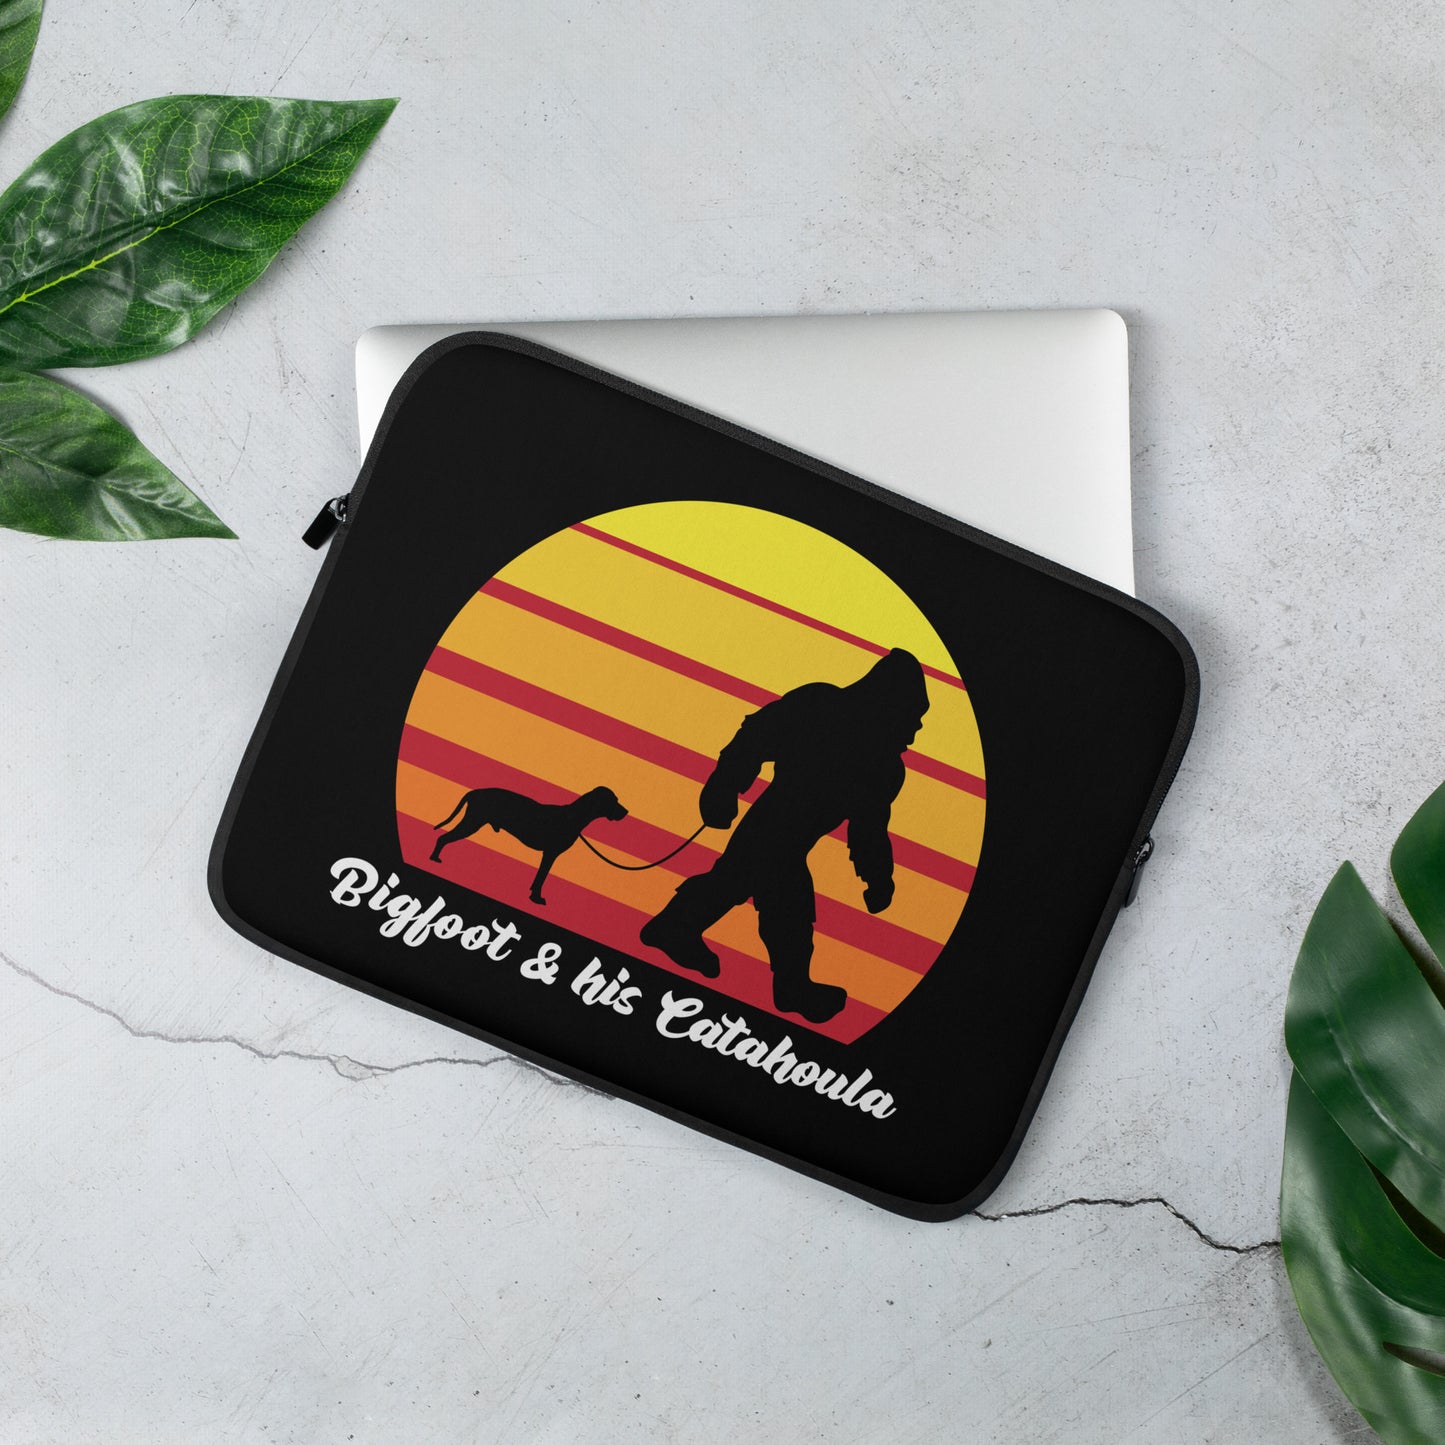 Bigfoot and his Catahoula Laptop Sleeve by Dog Artistry.